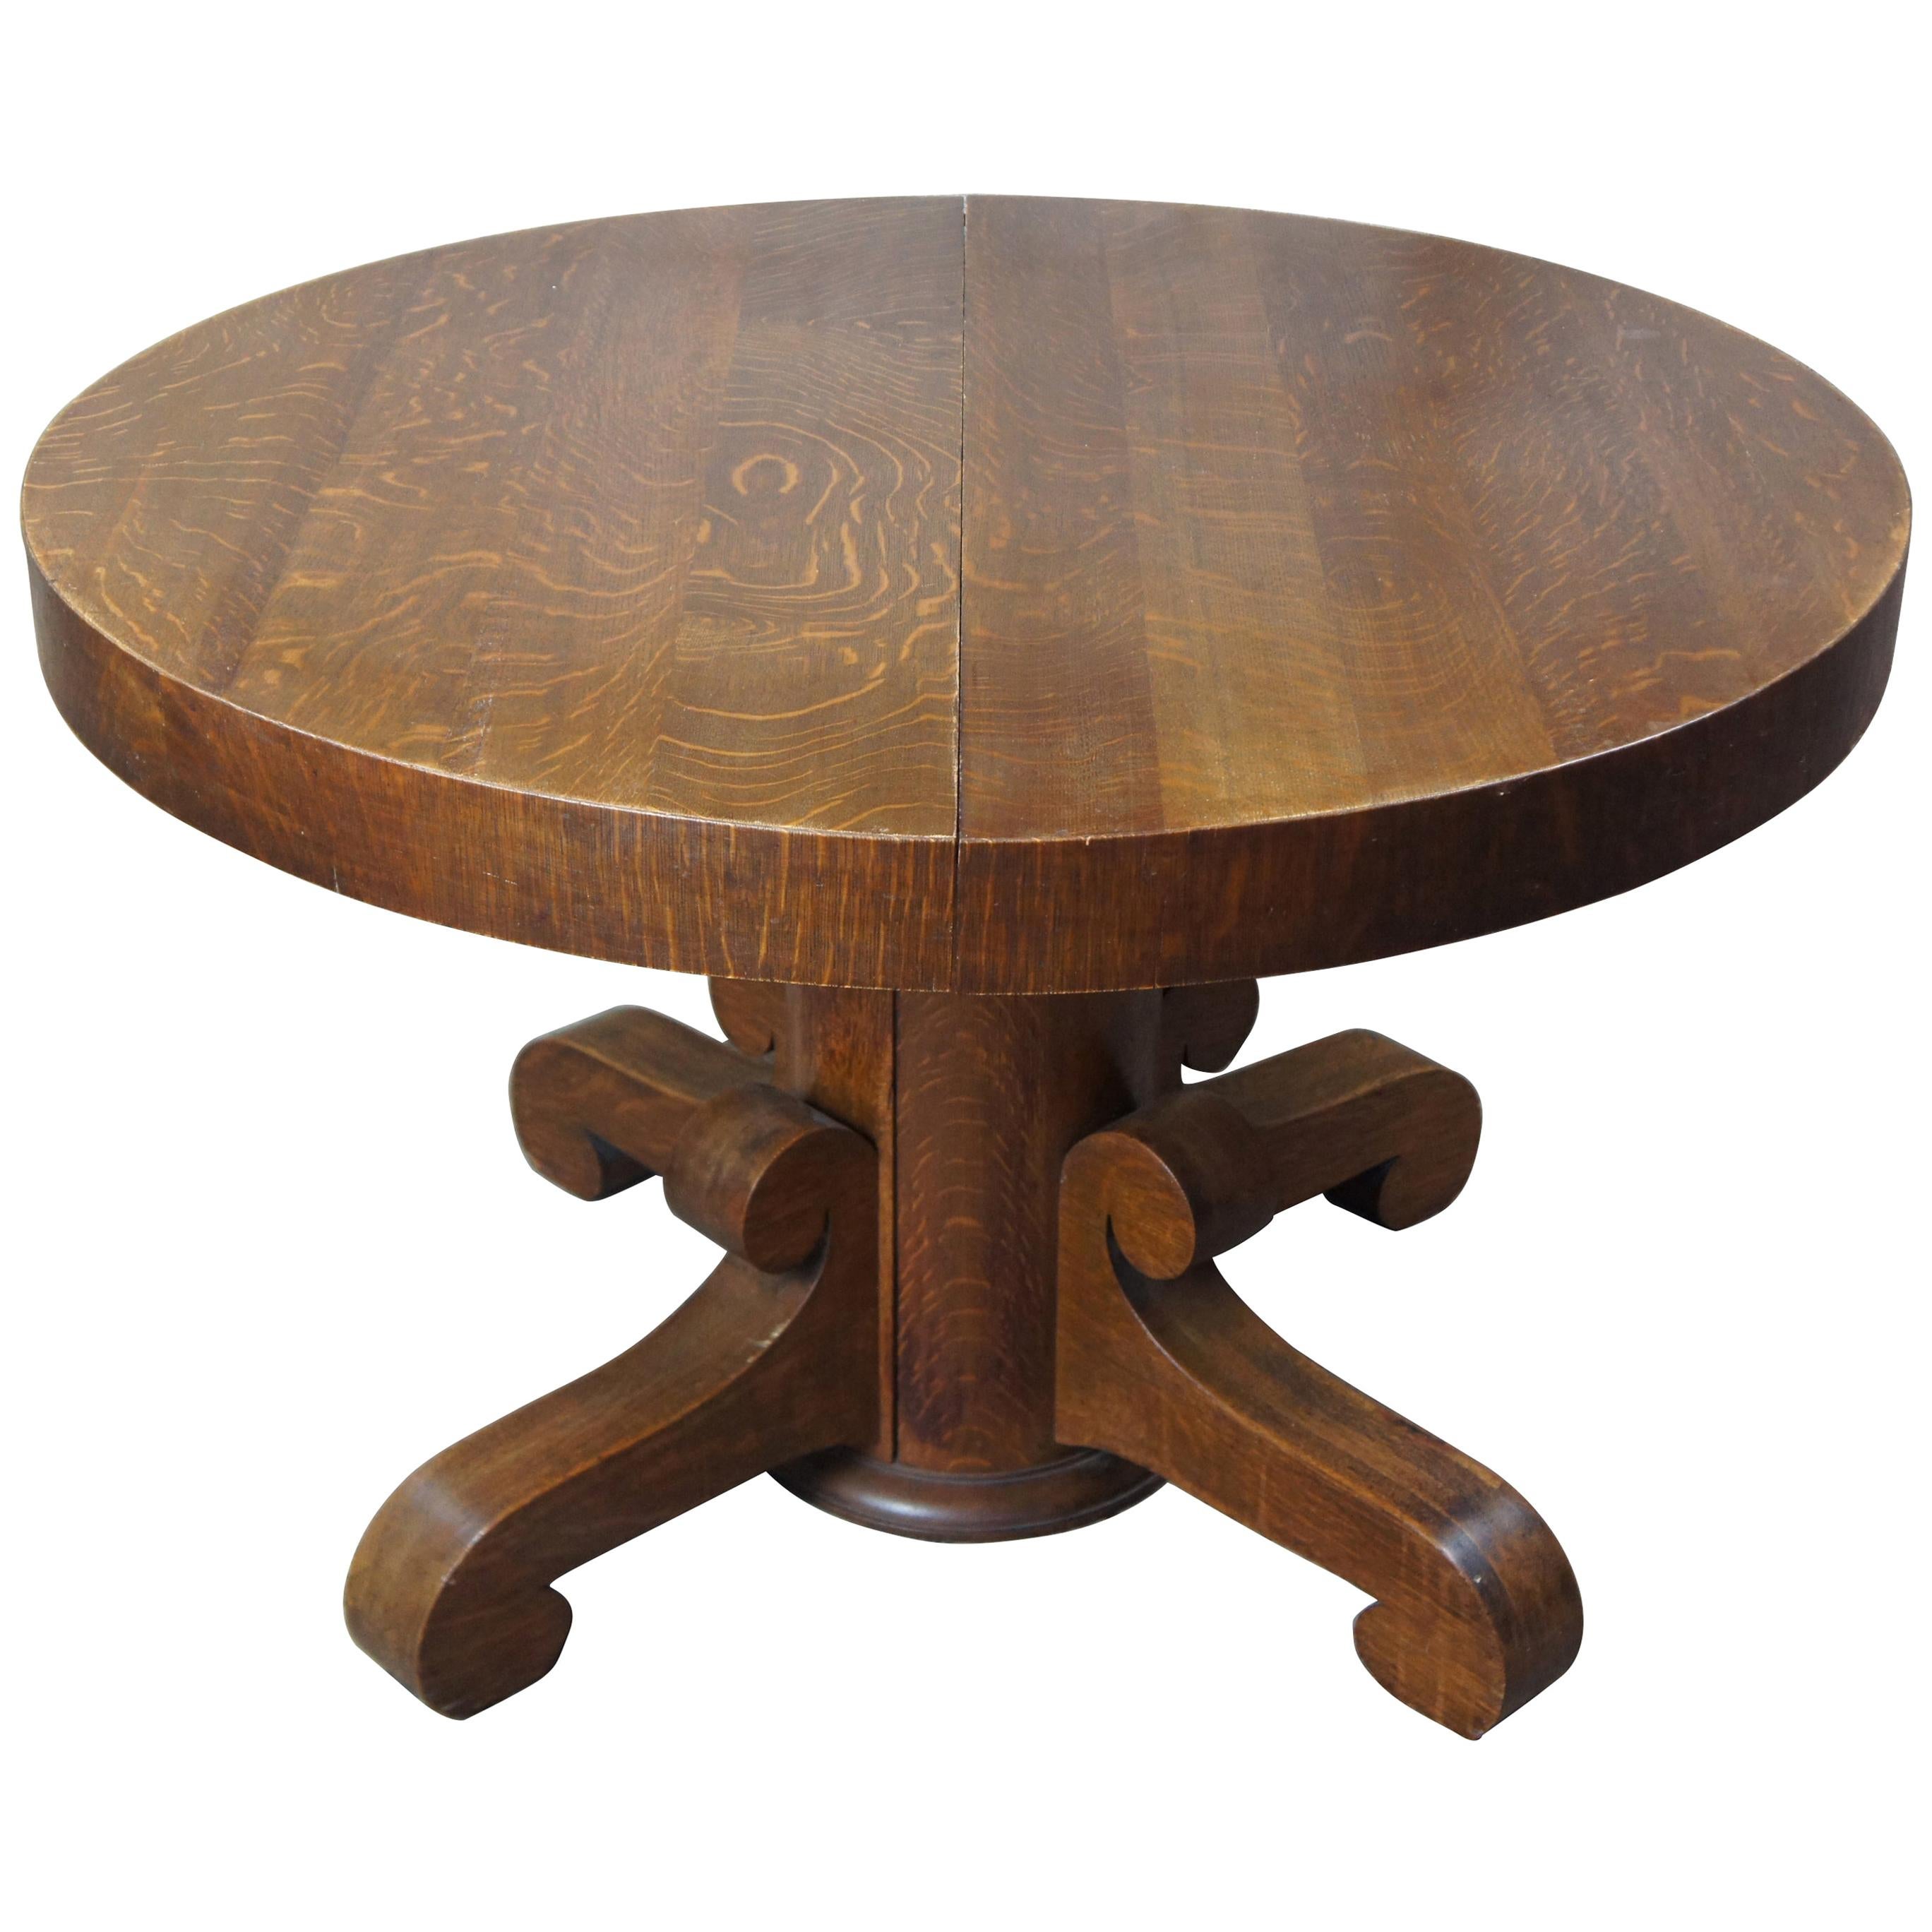 National Furniture Co. Antique Empire Quartersawn Oak Round Dining Table